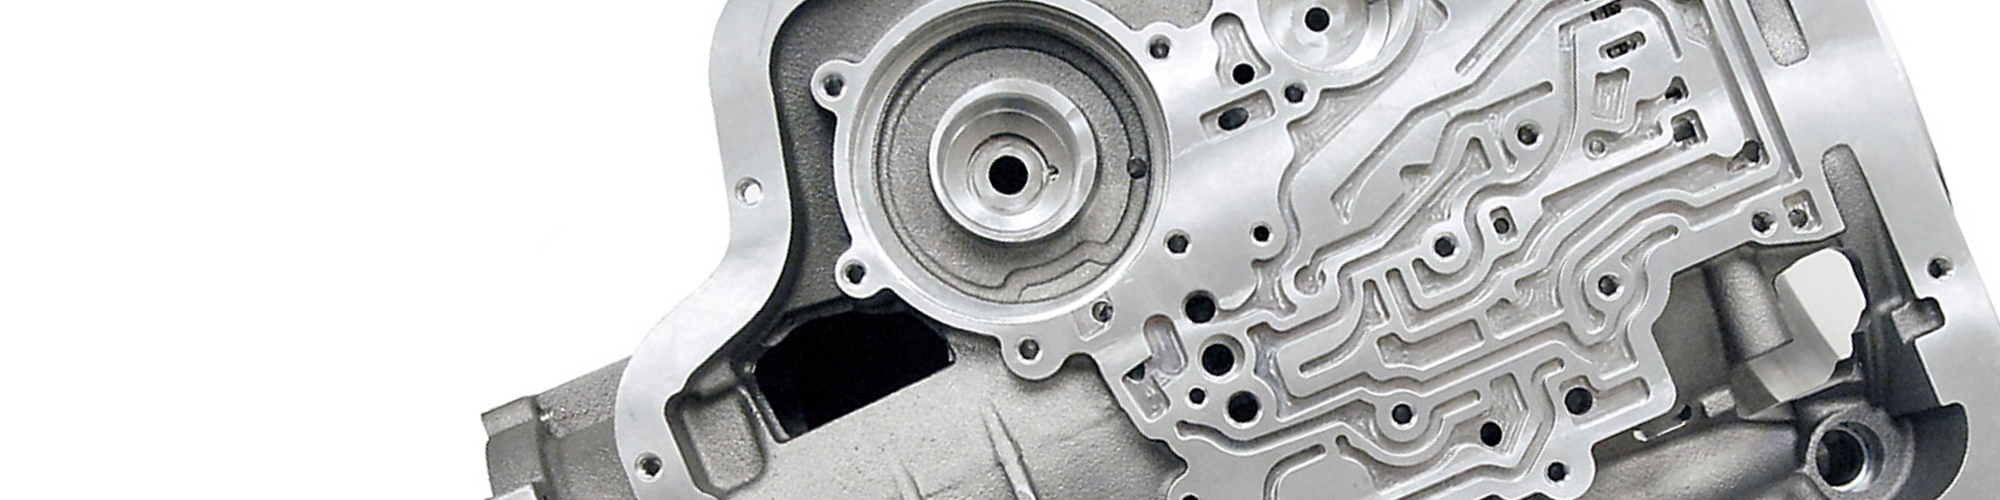 Ultrasonic Engine &amp; Transmission Parts Cleaning Services